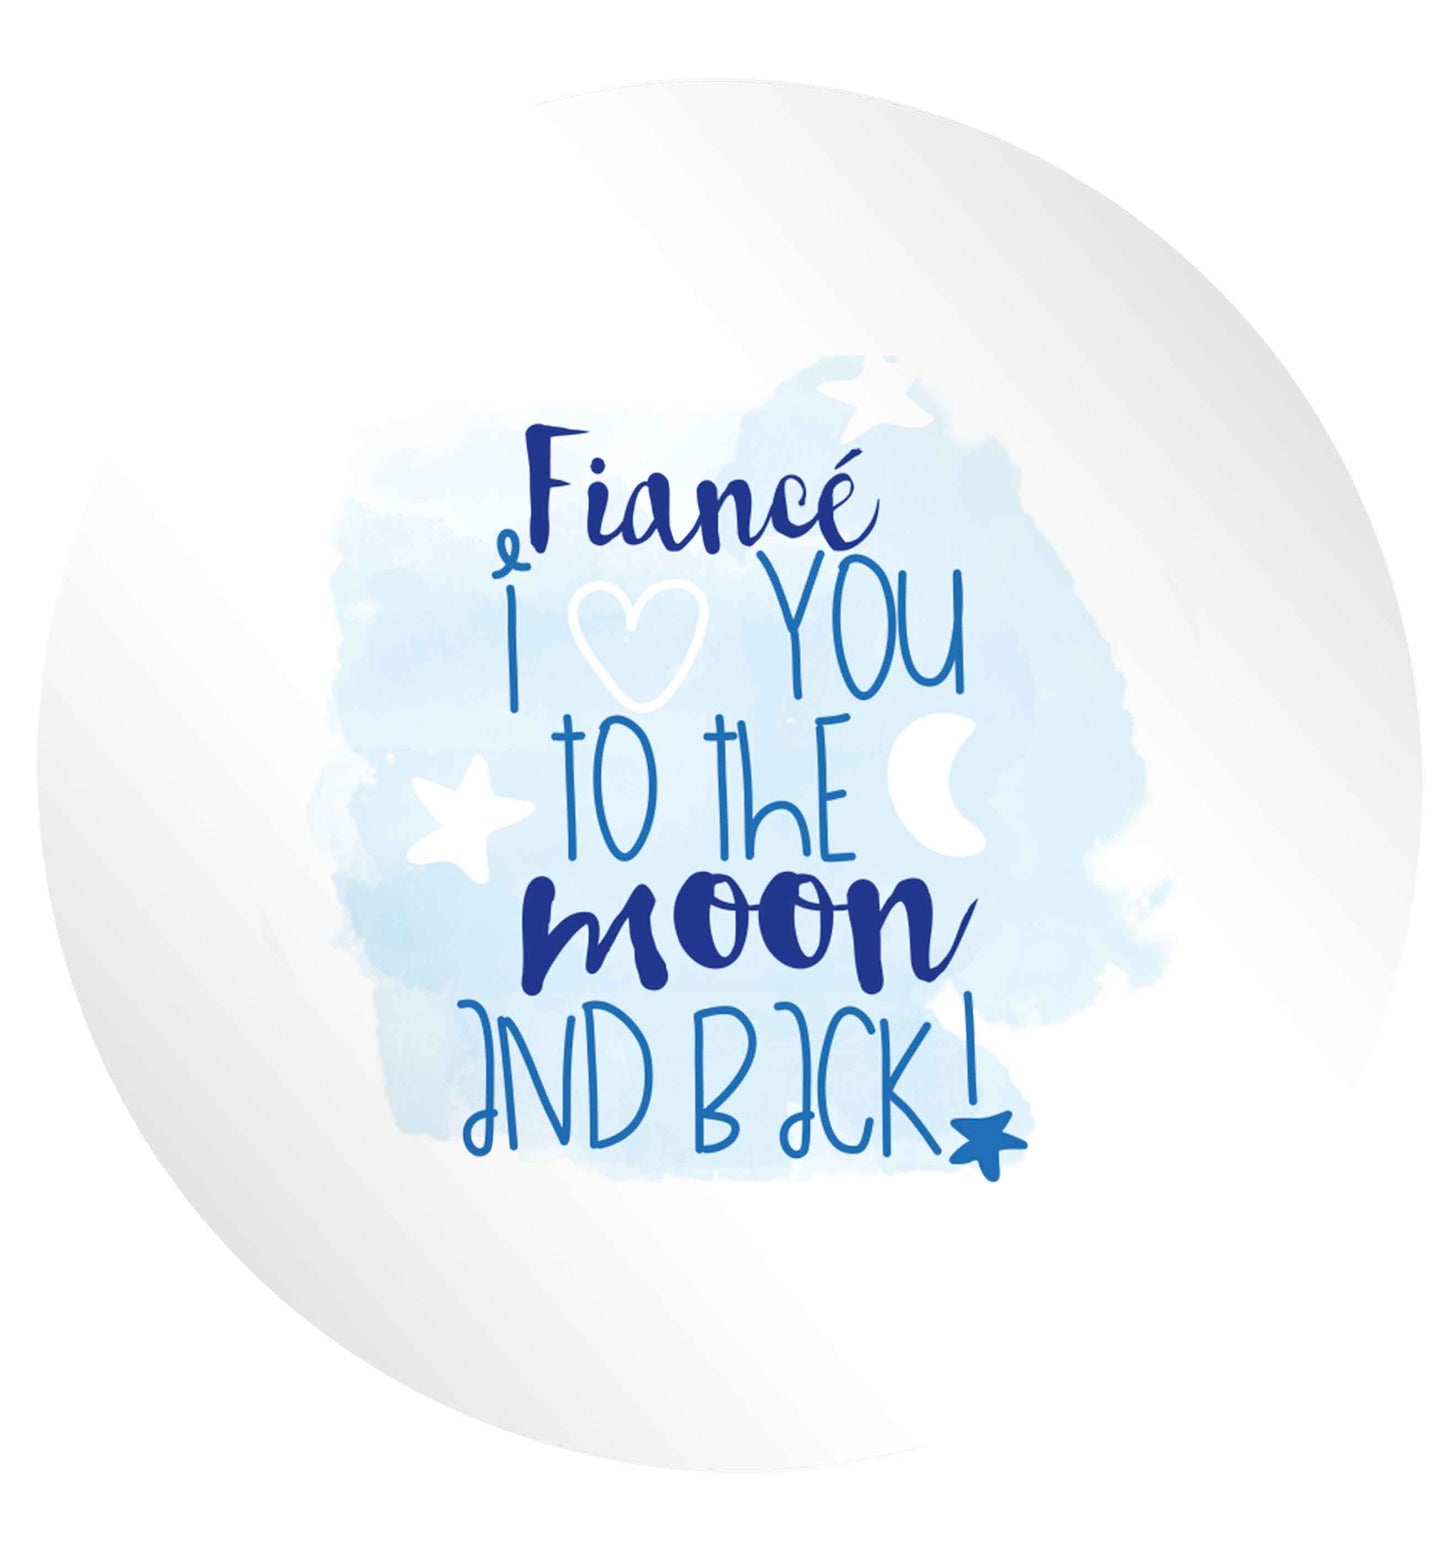 Fiancé I love you to the moon and back 24 @ 45mm matt circle stickers